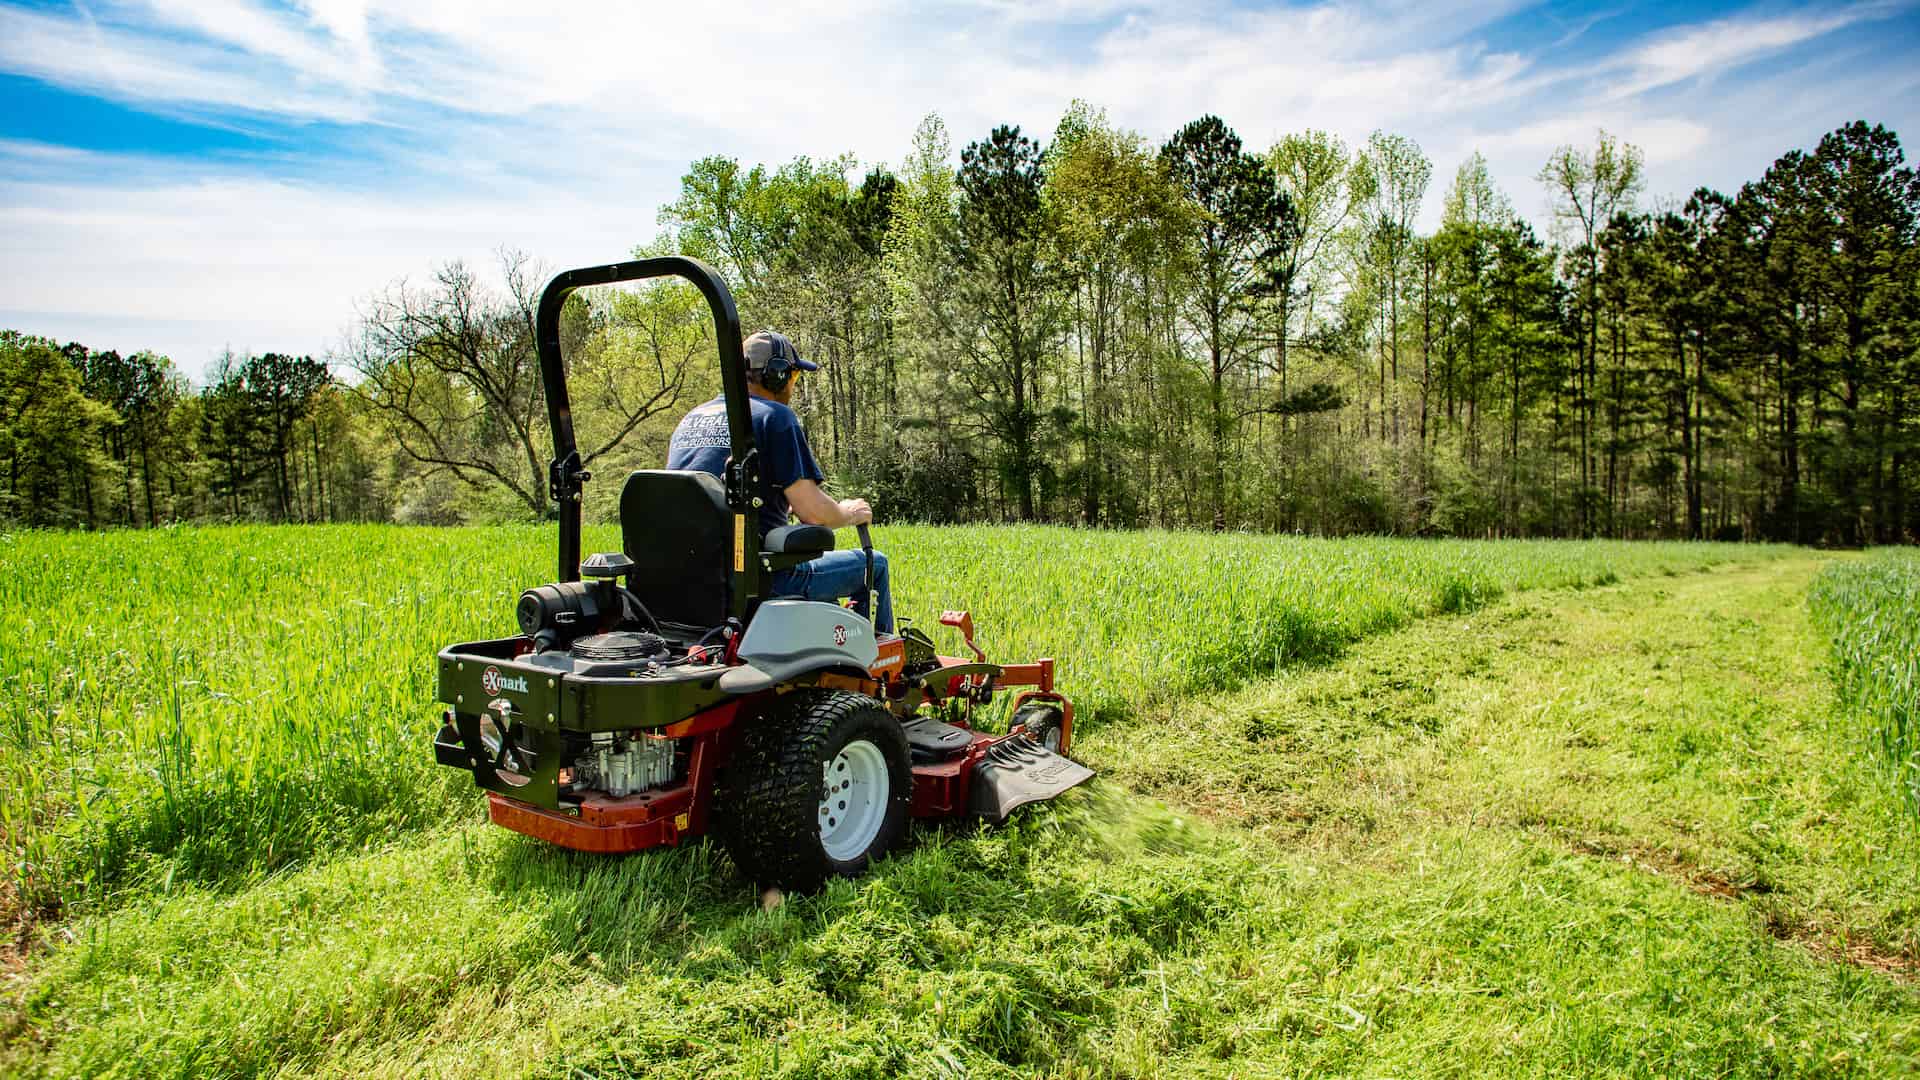 Mike Waddell mowing field on his Exmark zero-turn